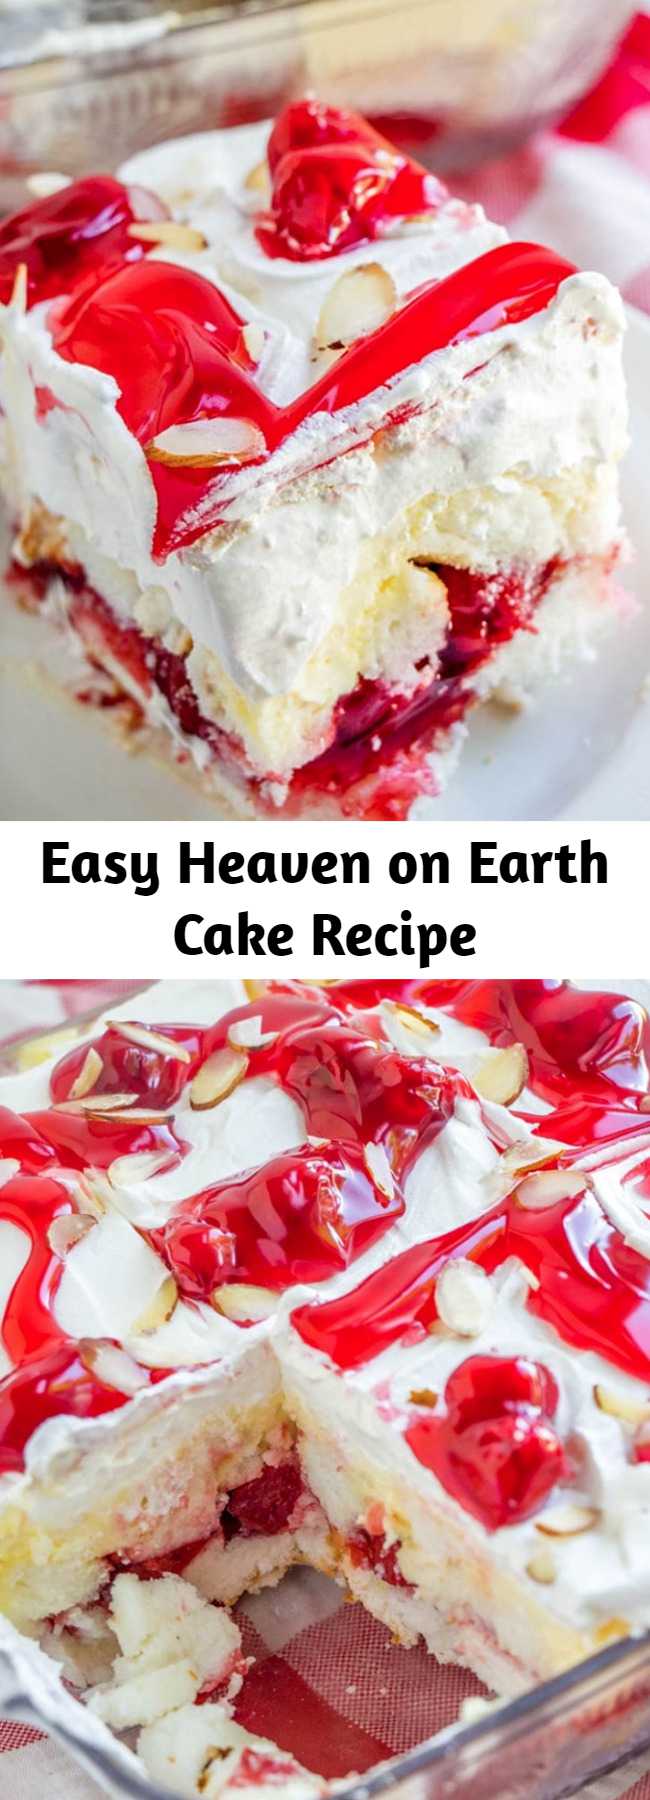 Easy Heaven on Earth Cake Recipe - Heaven on Earth Cake with delicious layers of angel cake, sour cream pudding, cherry pie filling, whipped topping, and almonds. Creamy and decadent, this cherry trifle is a sure crowd pleaser! #dessert #nobake #iceboxcake #triflecake #refrigeratorcake #cherries #easyrecipe #sweets